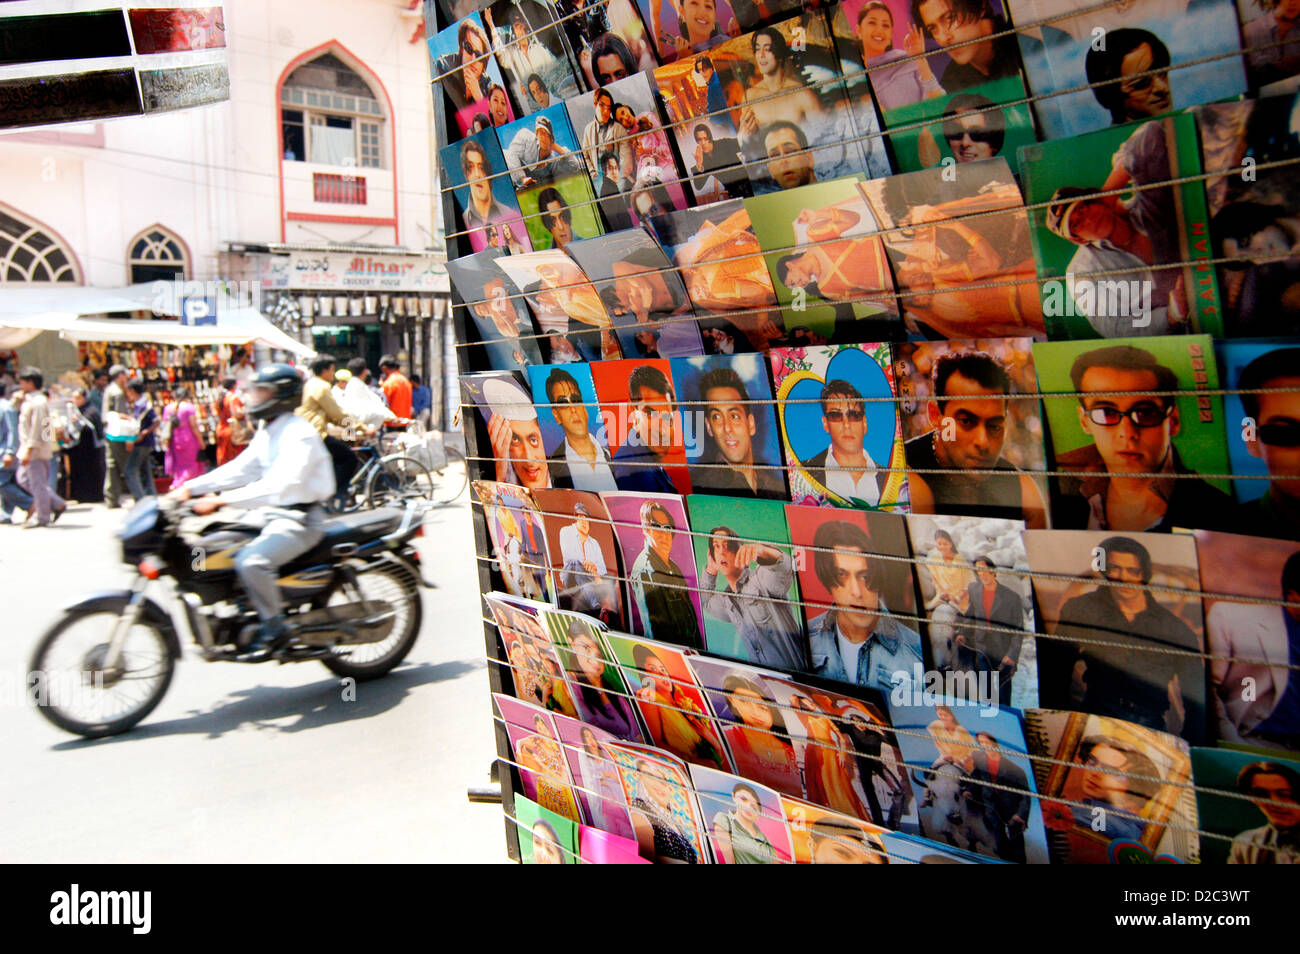 Postcards Of Indian Film Star Salman Khan Displayed In Shop For Sale In Old City Of Hyderabad, Andhra Pradesh, India Stock Photo